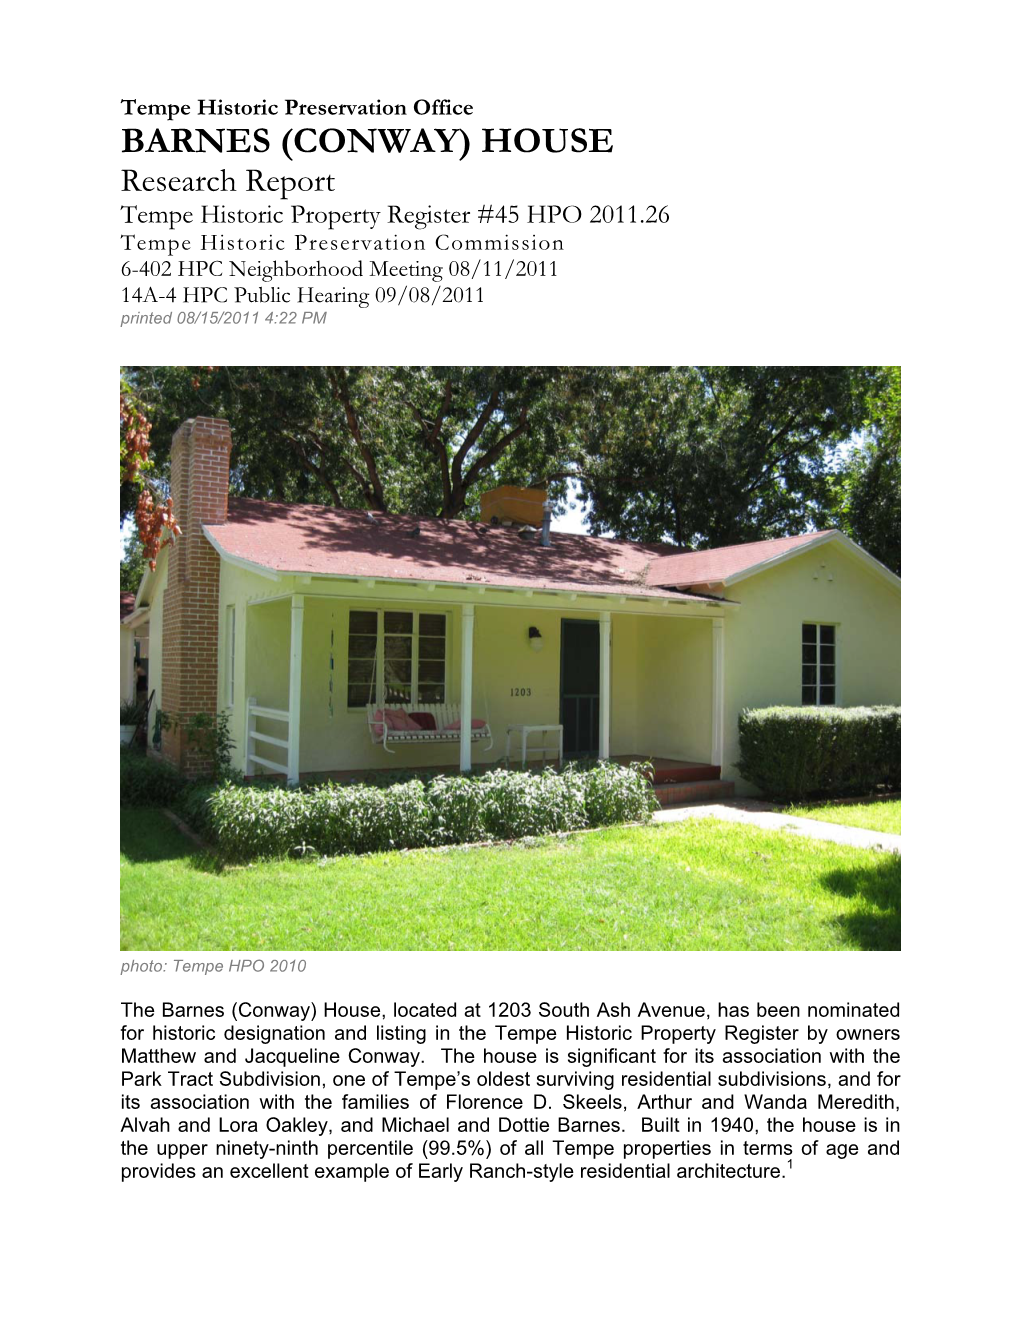 Research Report to Historic Preservation